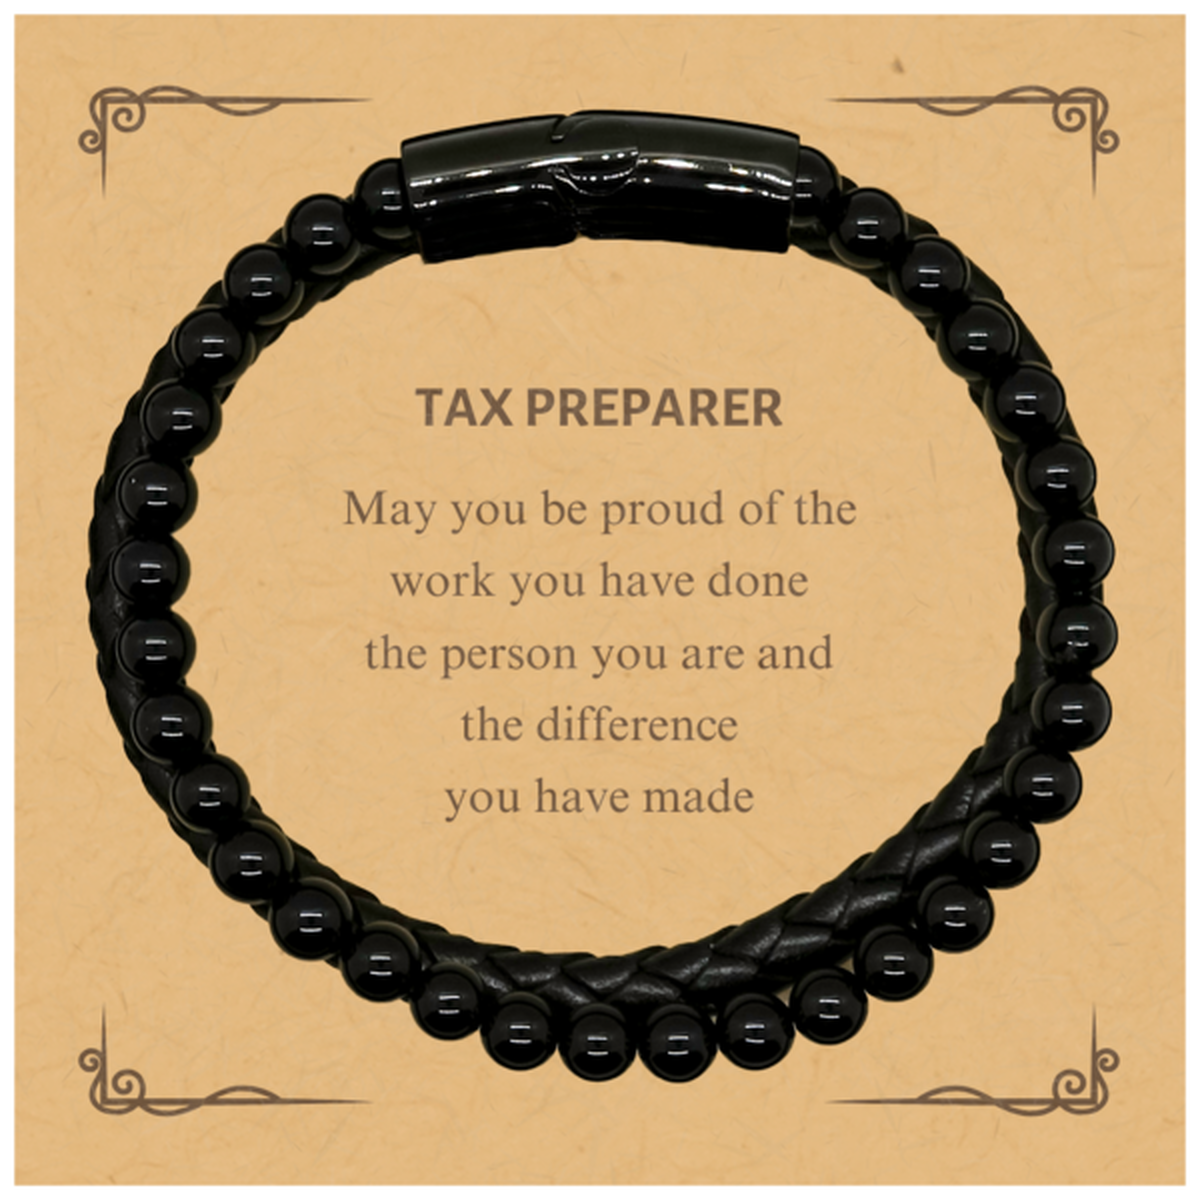 Tax Preparer May you be proud of the work you have done, Retirement Tax Preparer Stone Leather Bracelets for Colleague Appreciation Gifts Amazing for Tax Preparer